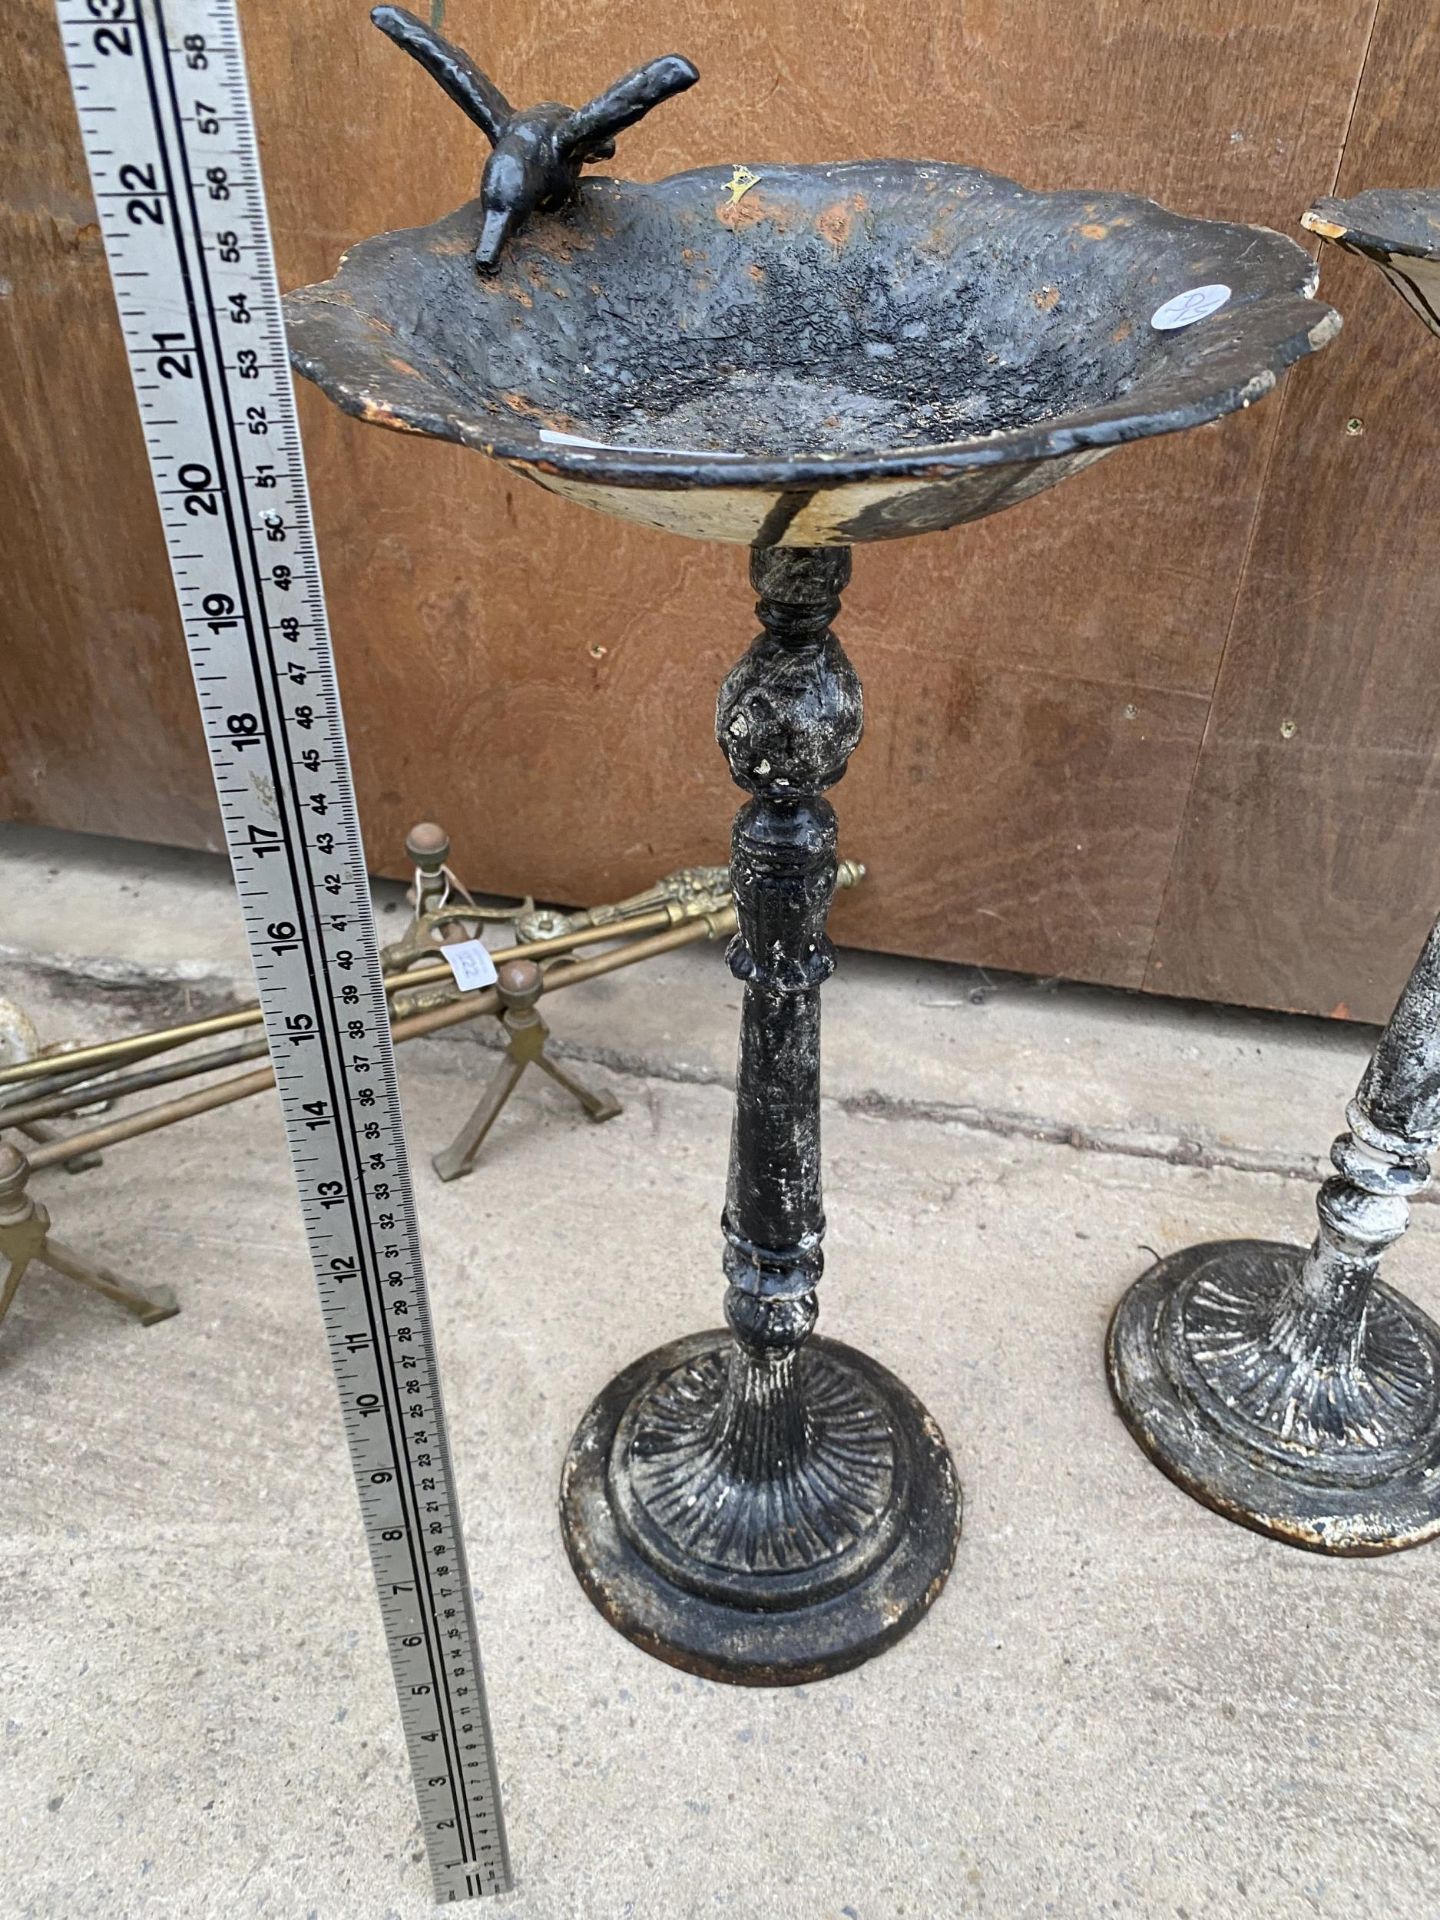 A SMALL CAST IRON BIRD TABLE WITH BIRD FIGURE (H:53CM) - Image 2 of 3